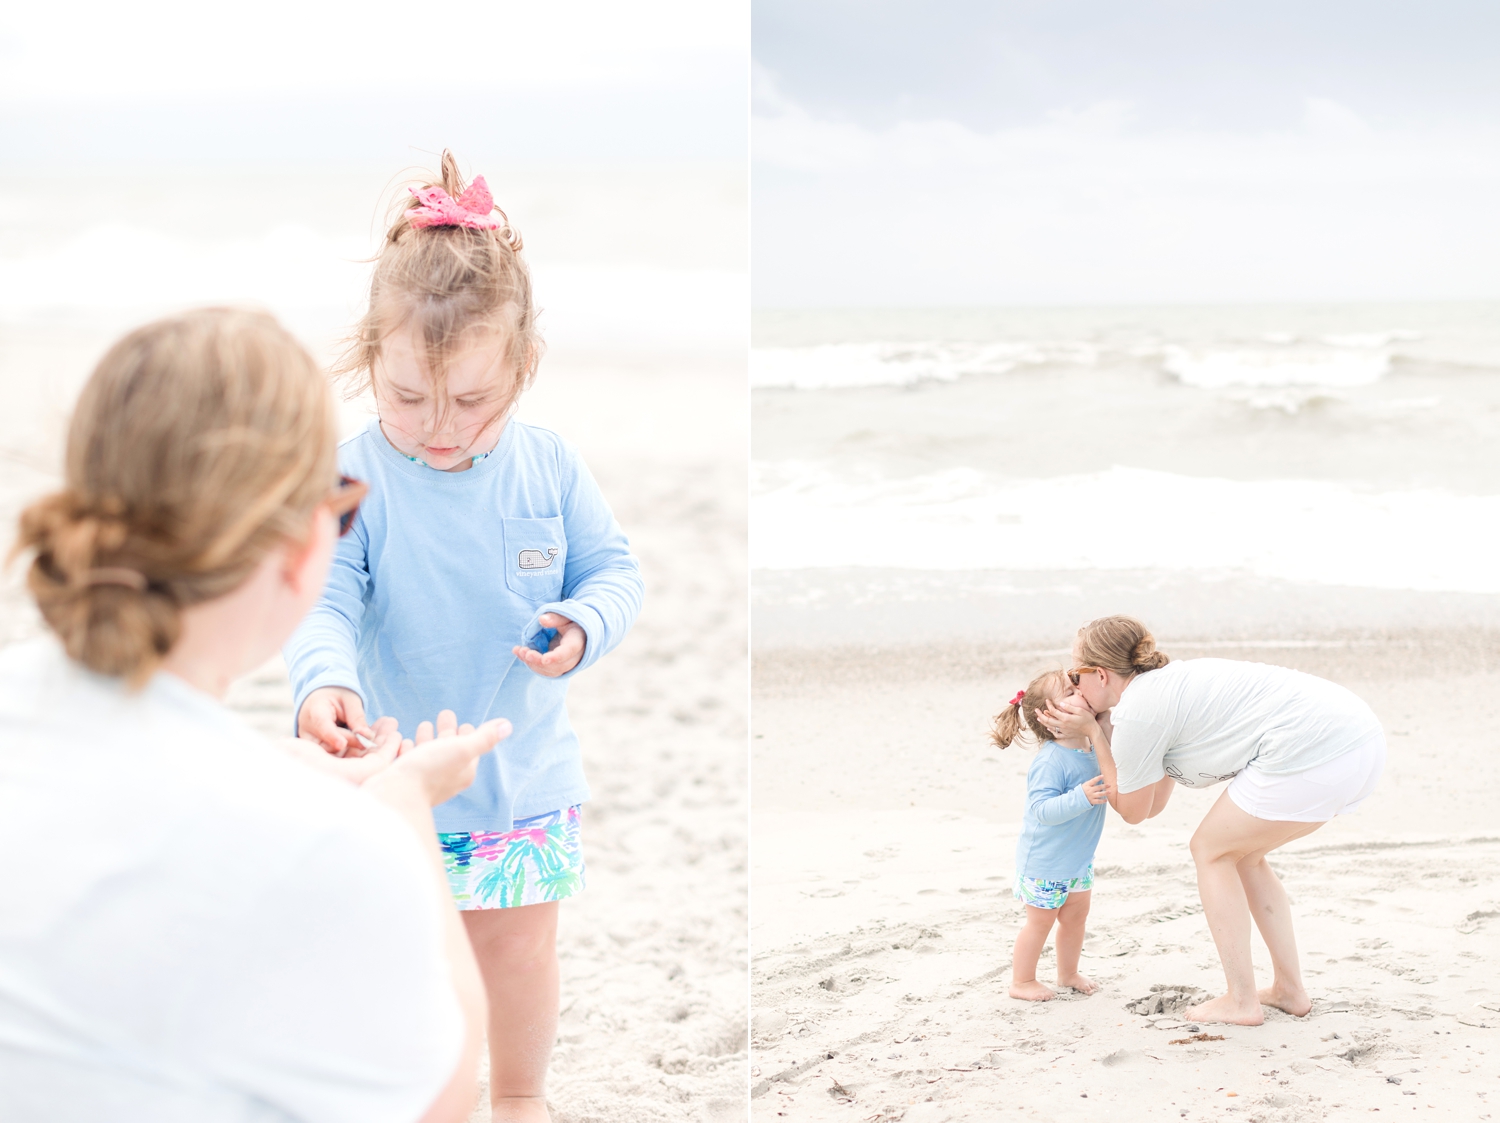  Searching for seashells with Payton was definitely one of my favorite parts of the trip! 